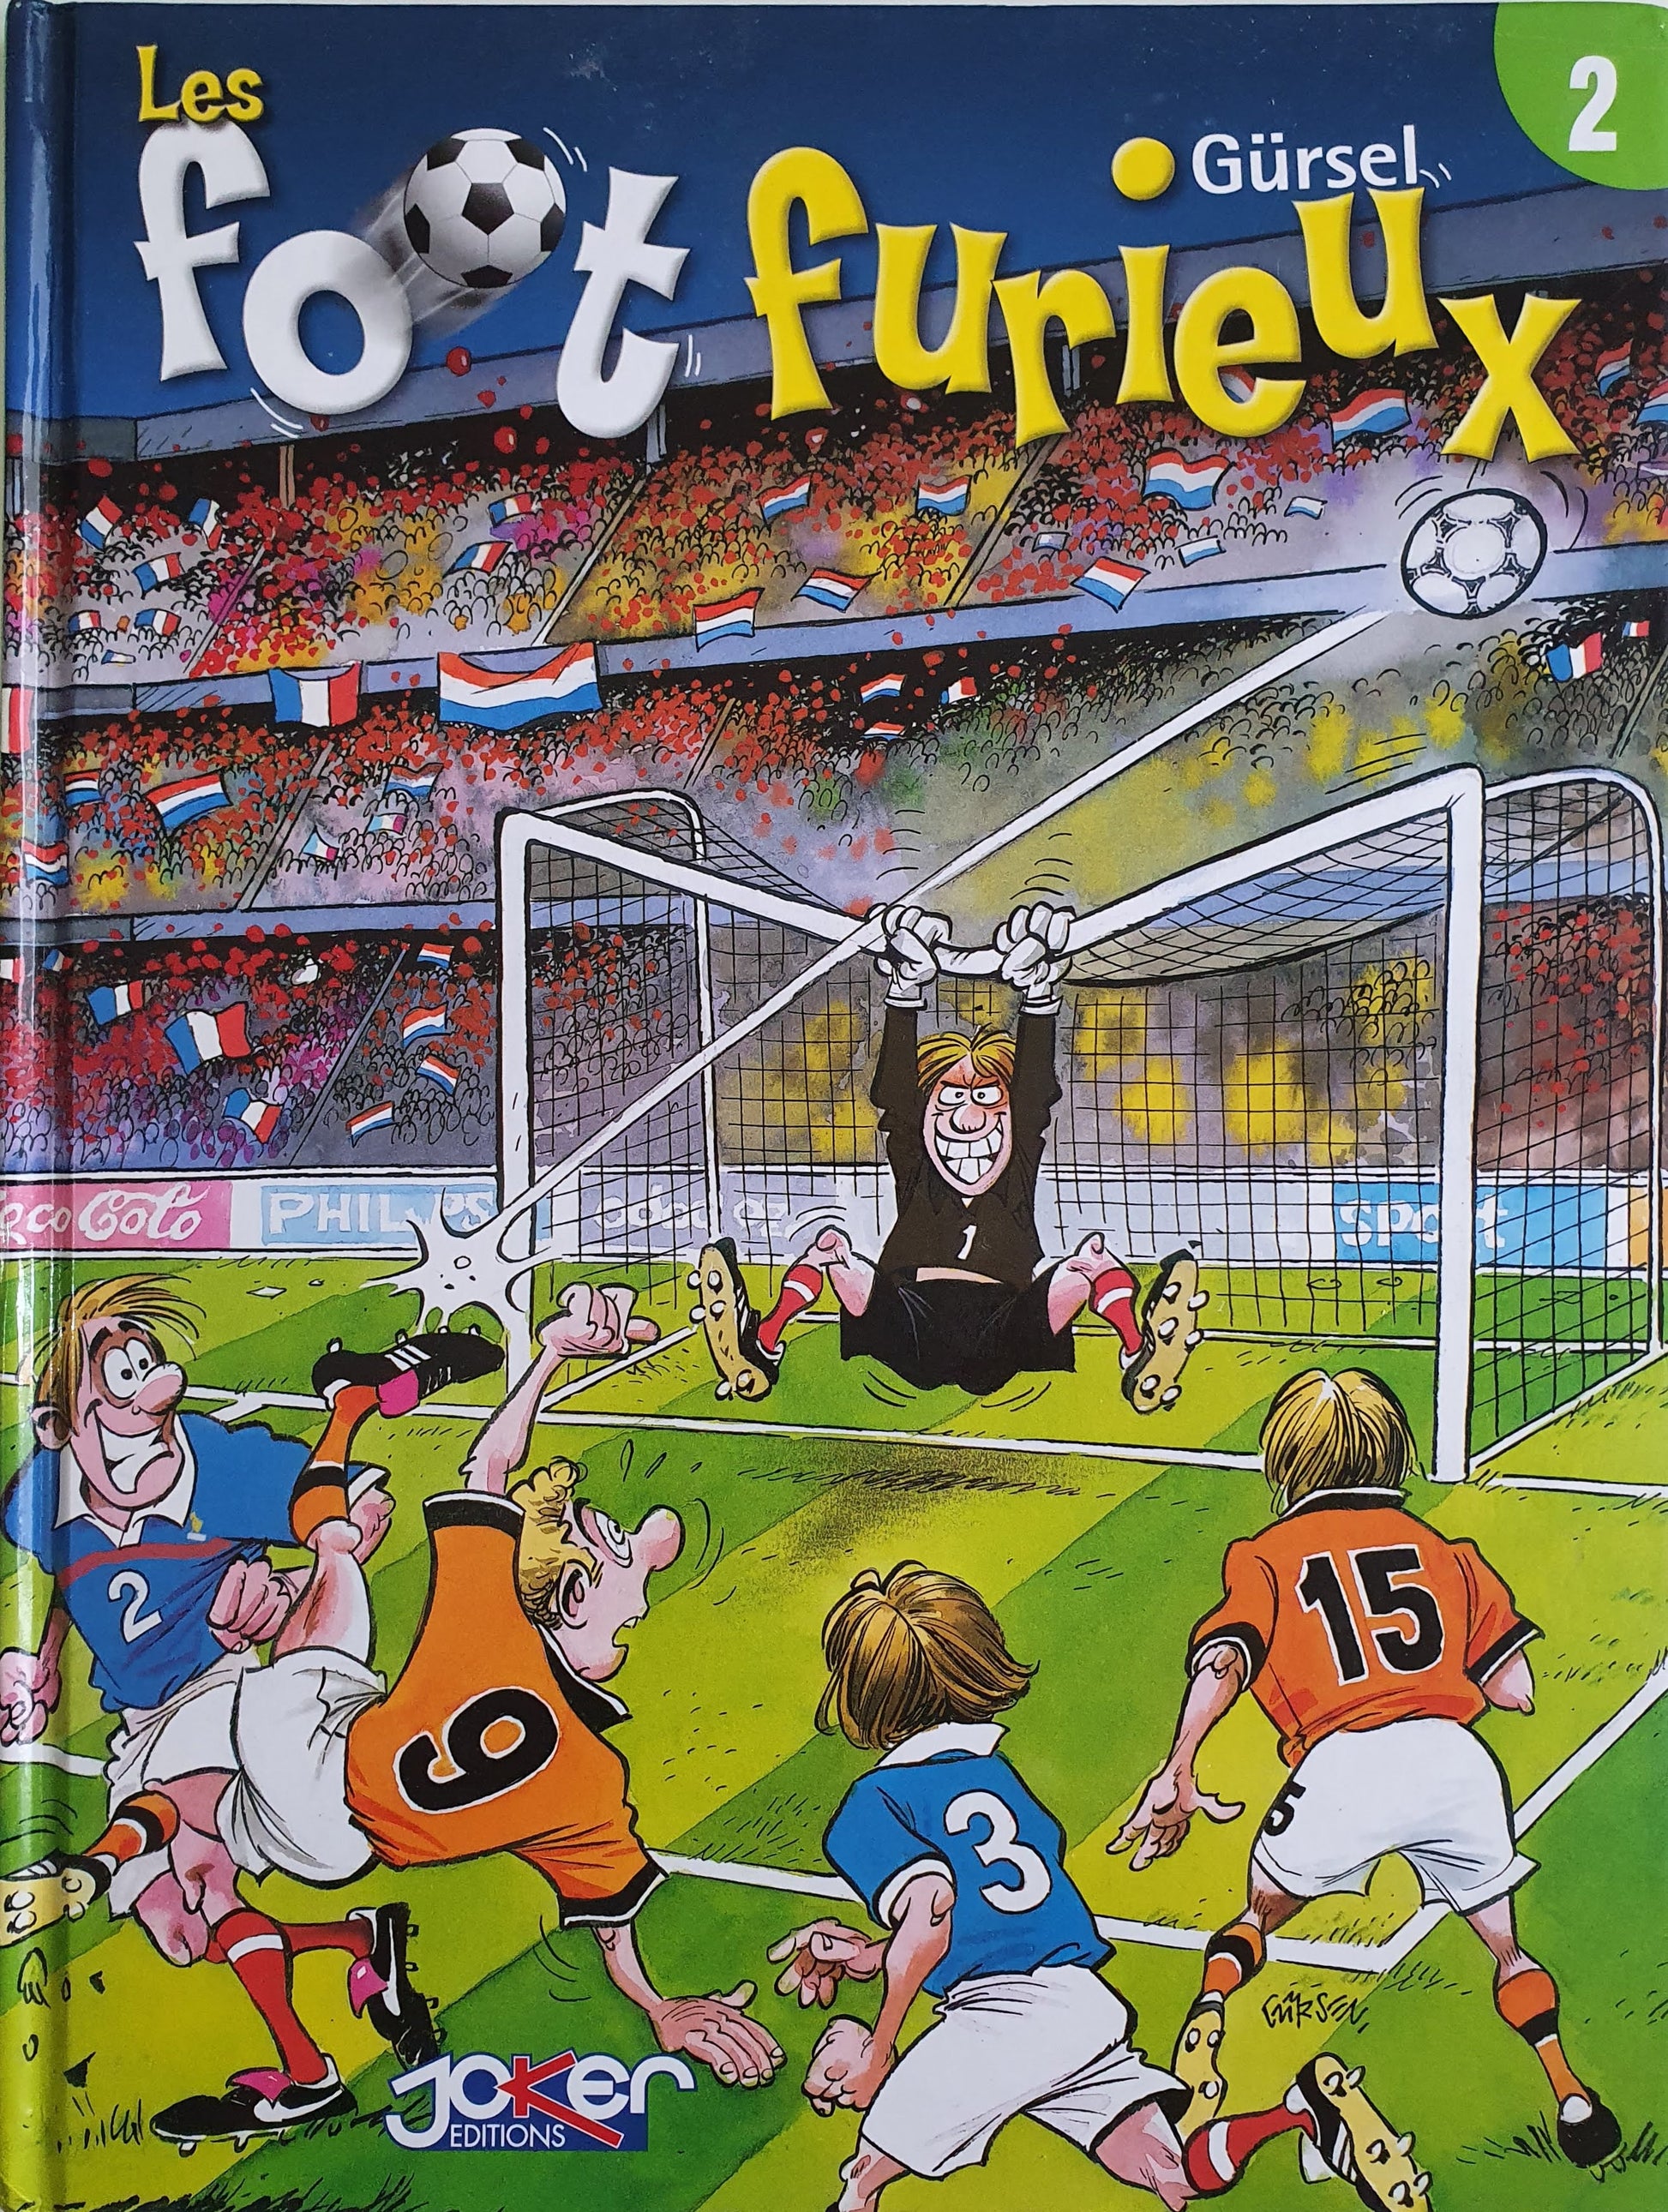 Les foot furieux Volume 2 Like New Les foot furieux  (6070066315449)